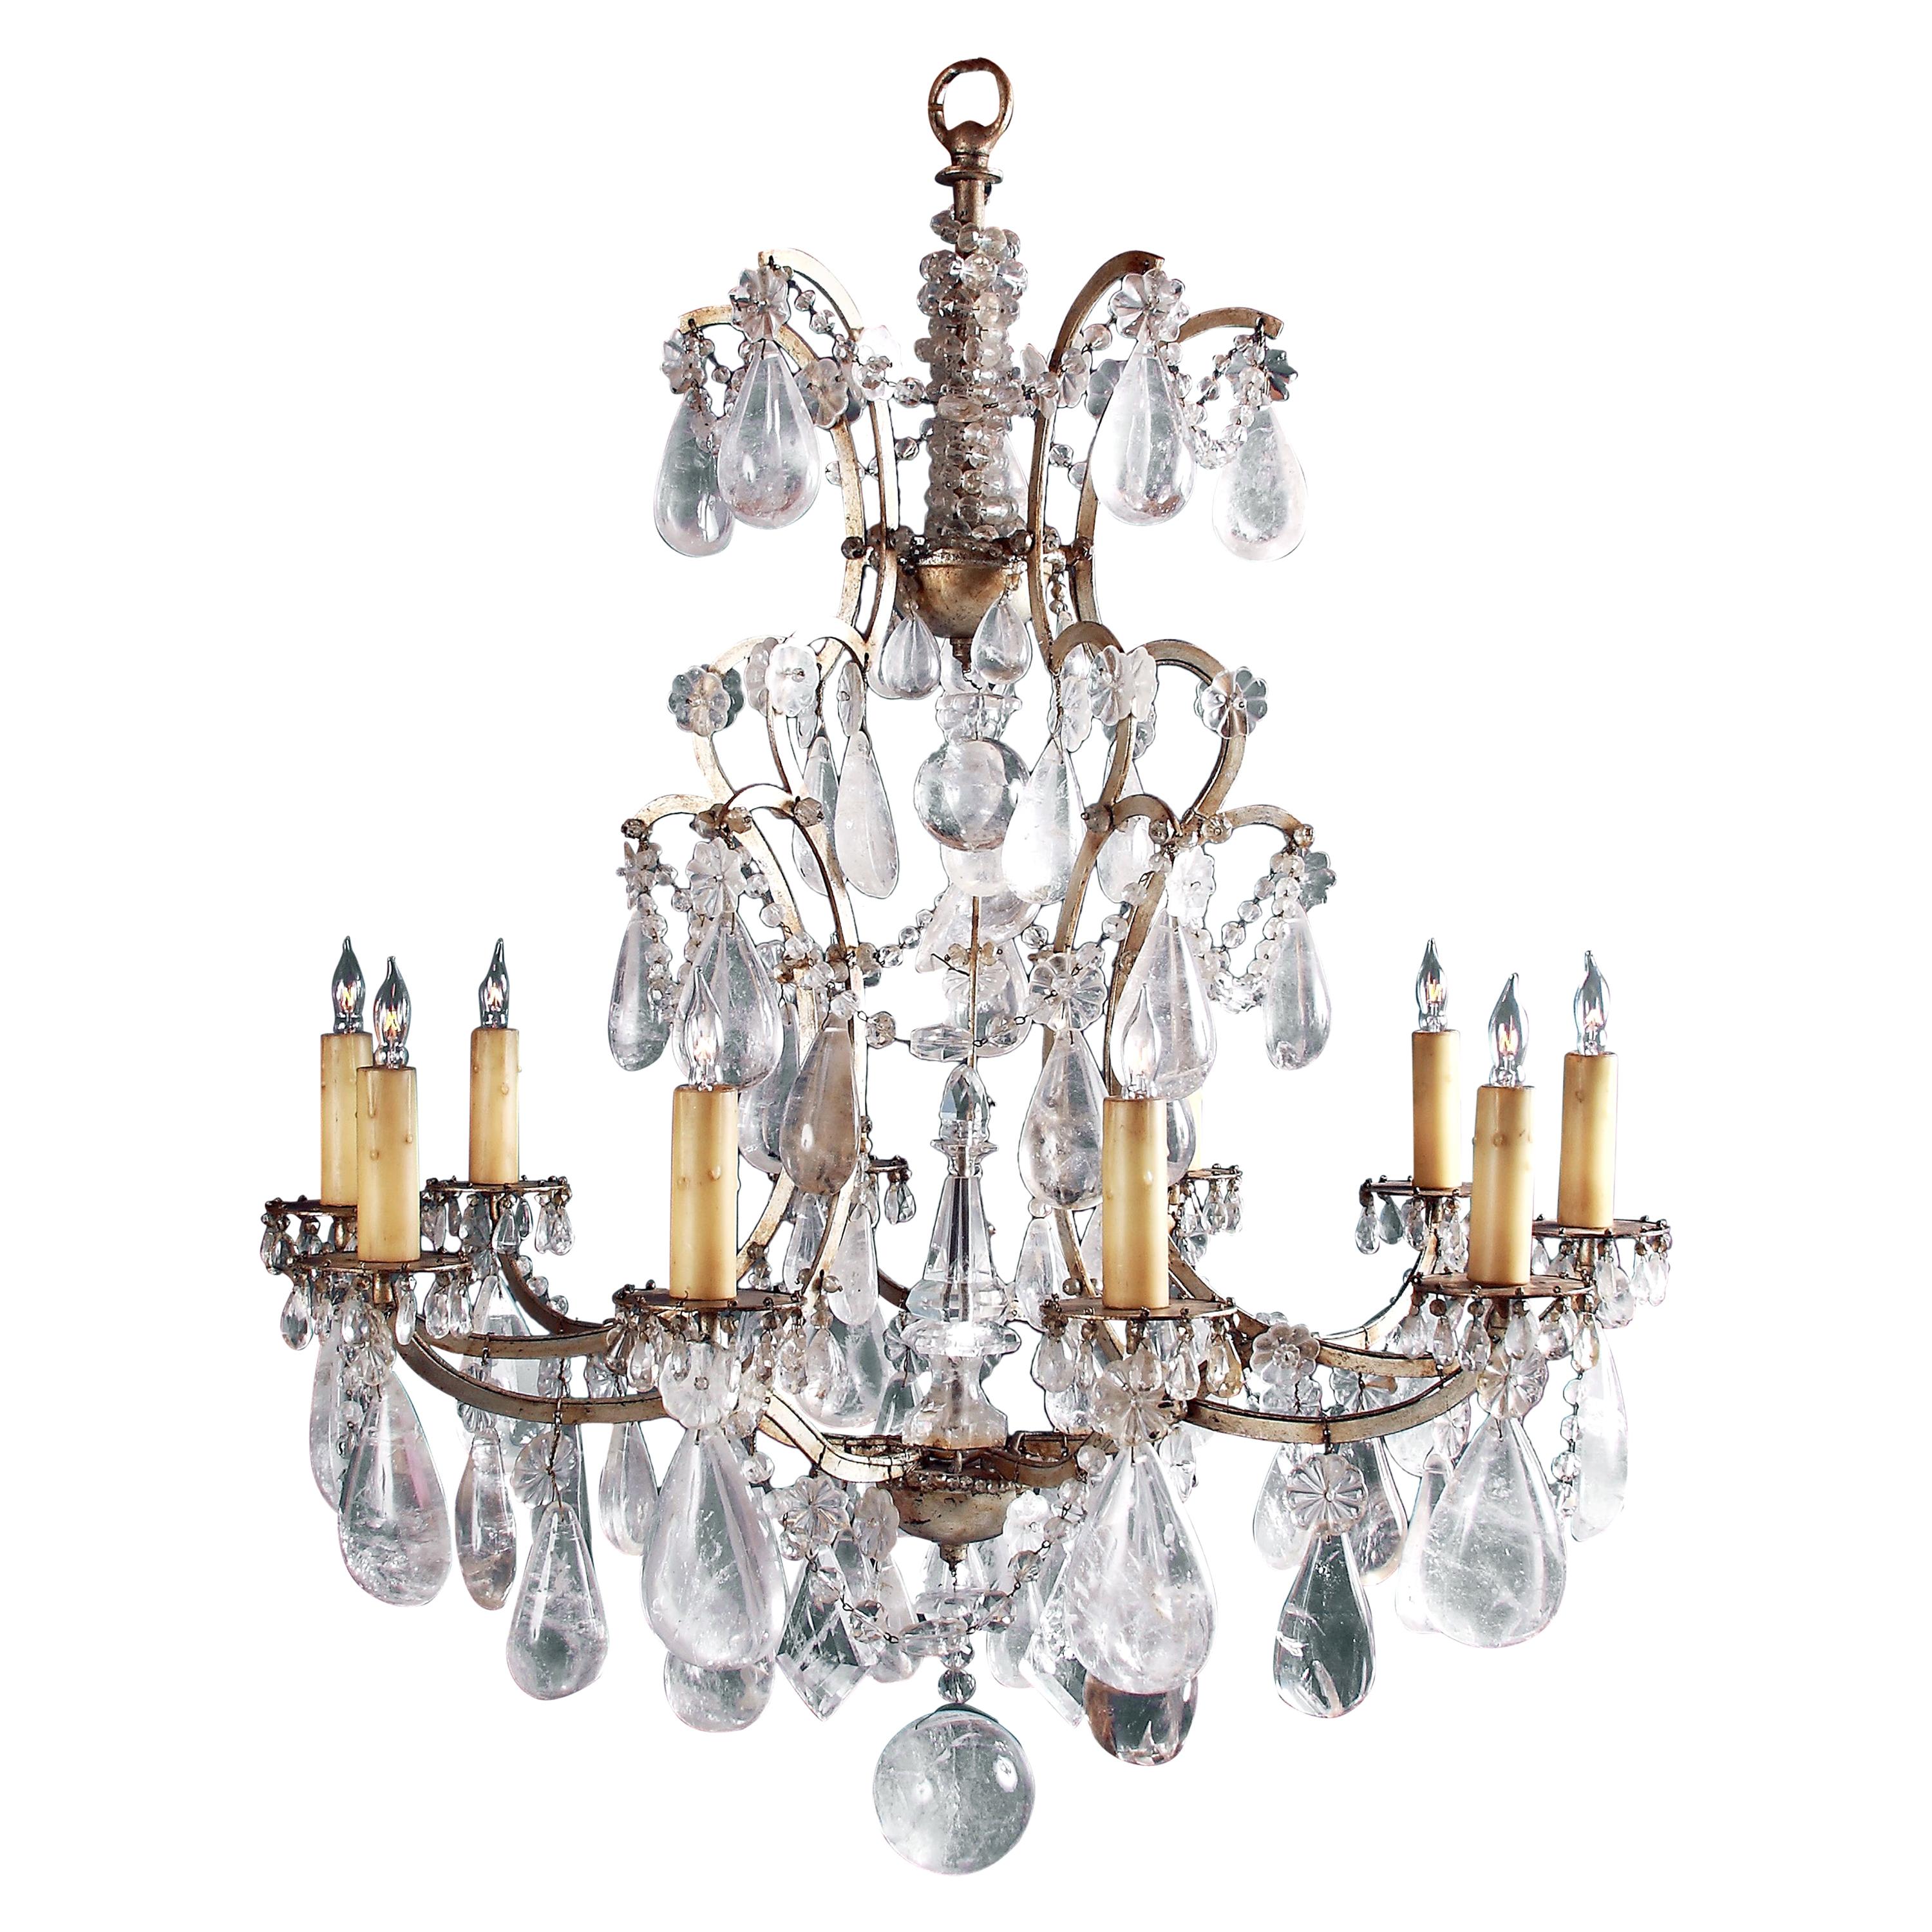 A beautiful and well balanced French mid-19th century rock crystal and white gold over iron chandelier, a rock crystal center spire, drops and ropes. The chandelier is centered by a fabulous rock crystal ball. It holds over 70 handcut superb quality